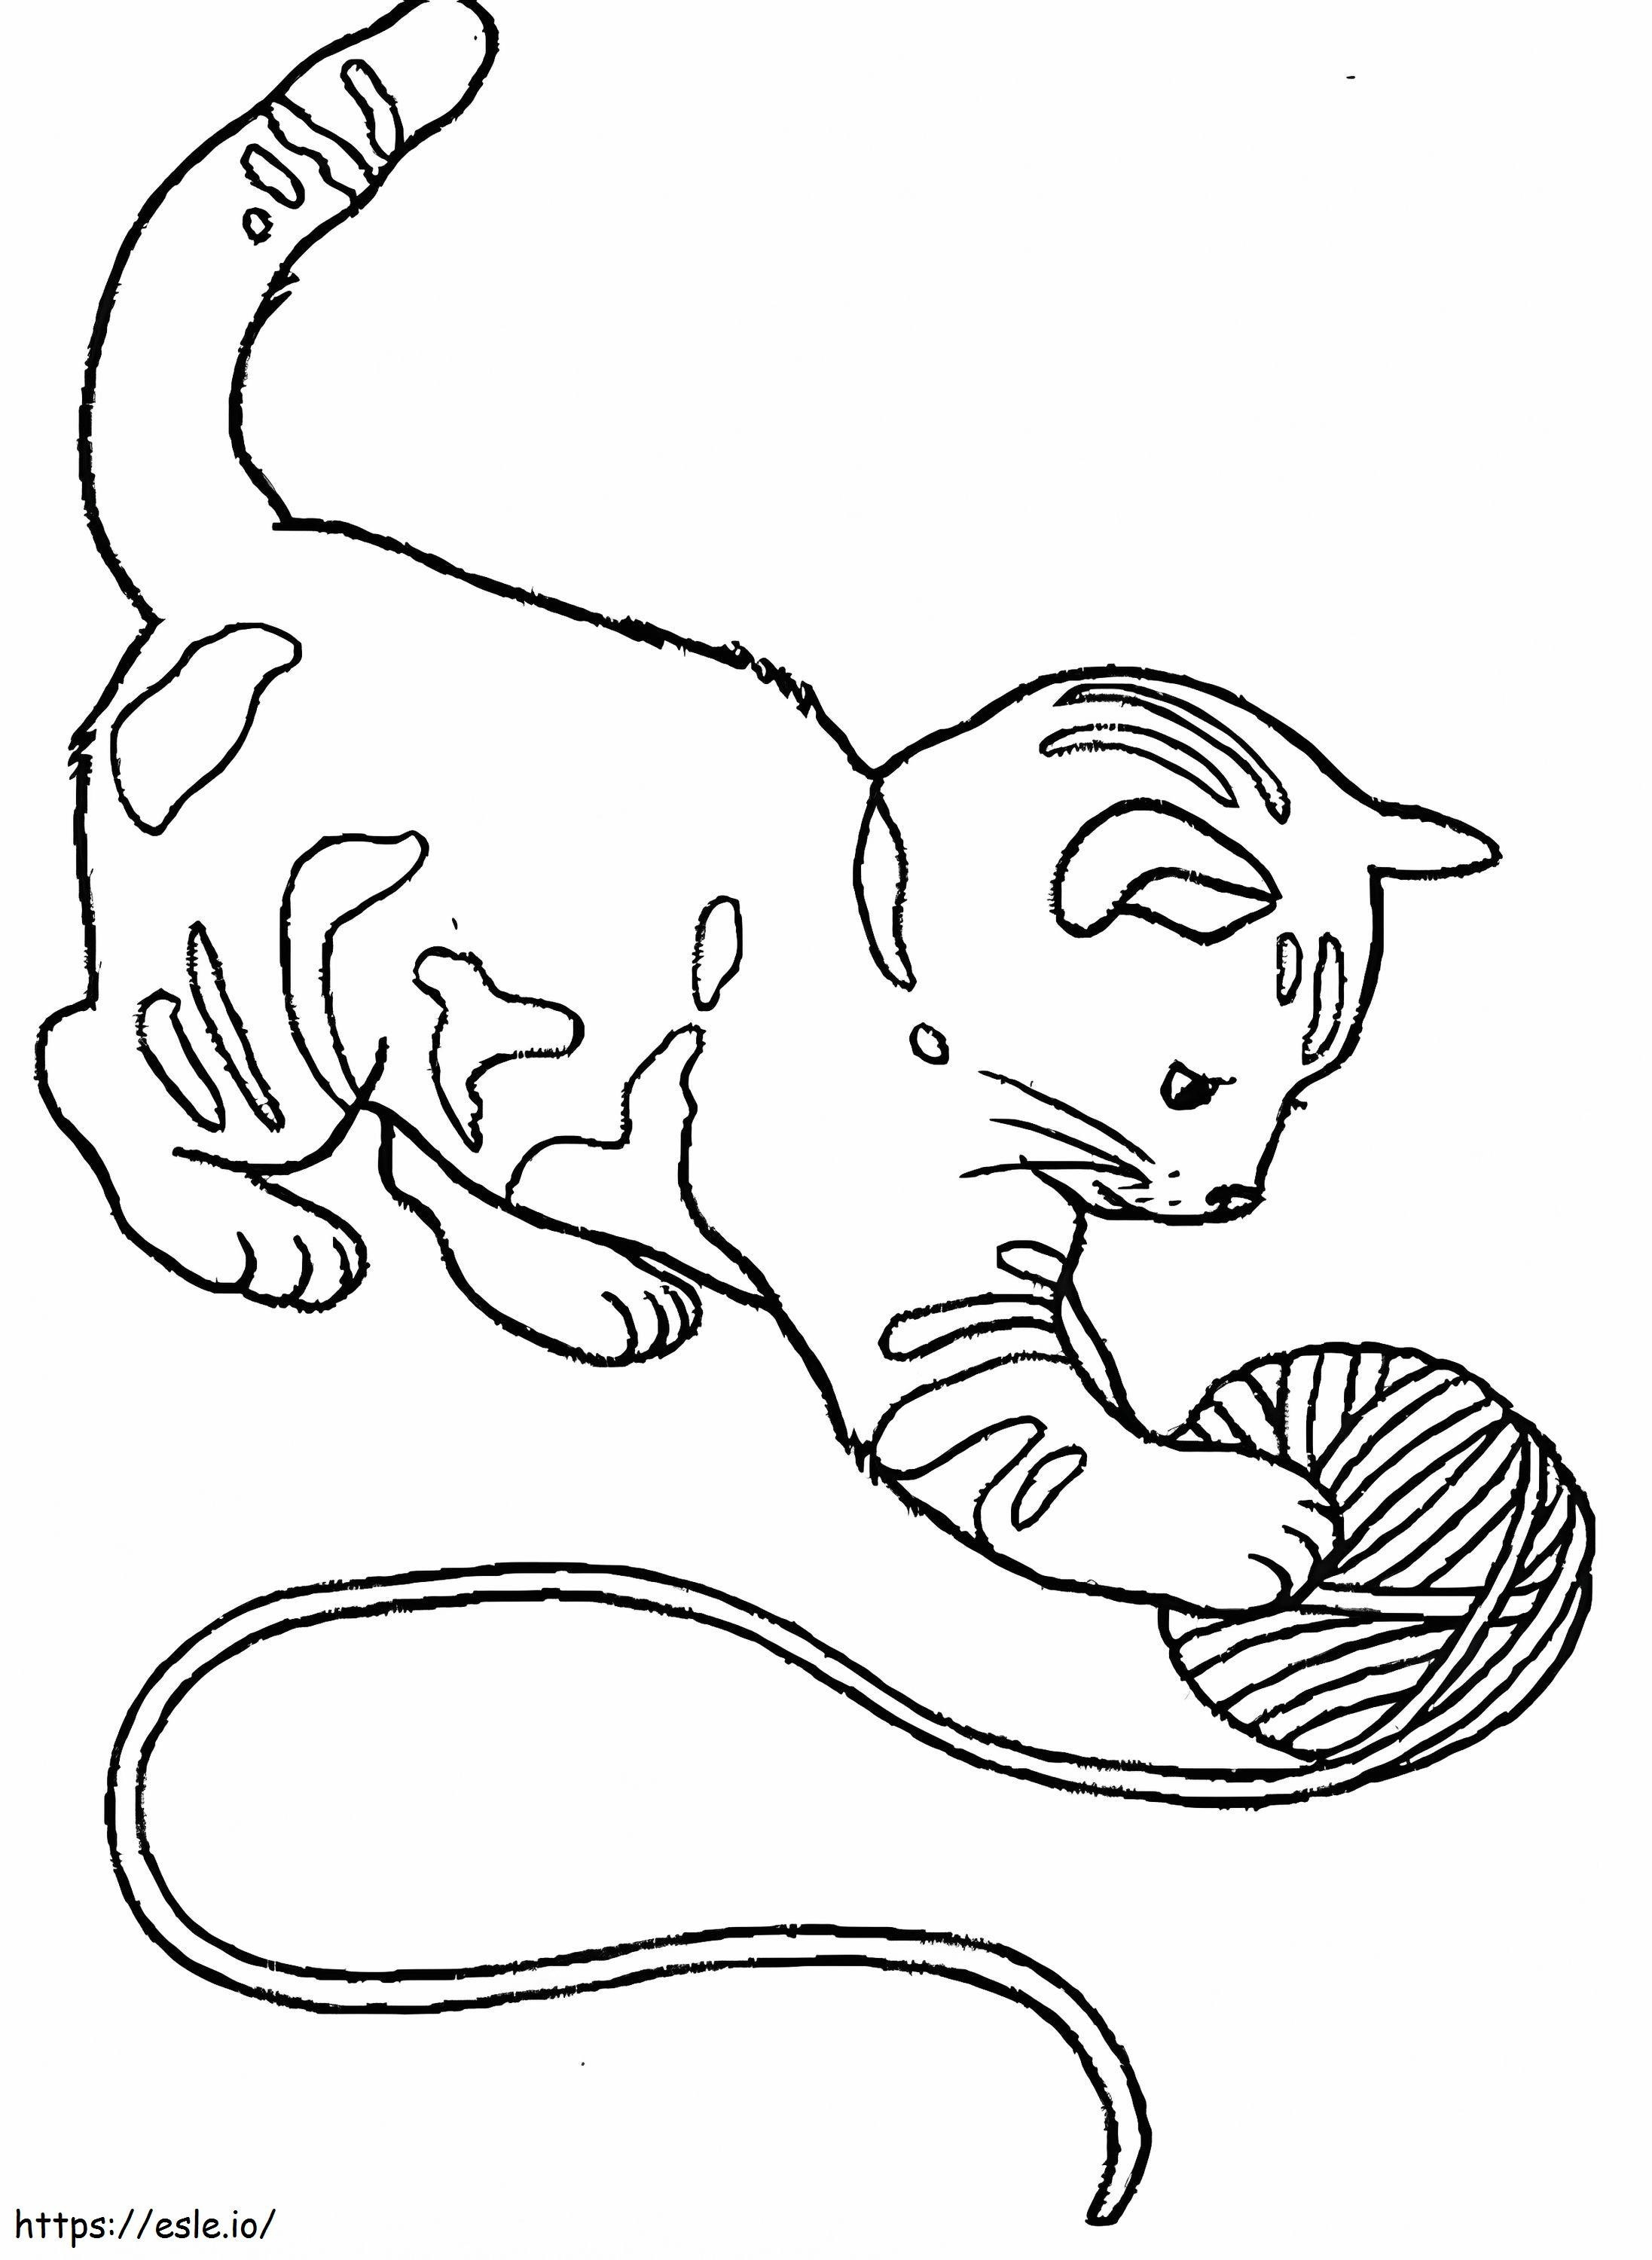 Kitten With Wool coloring page